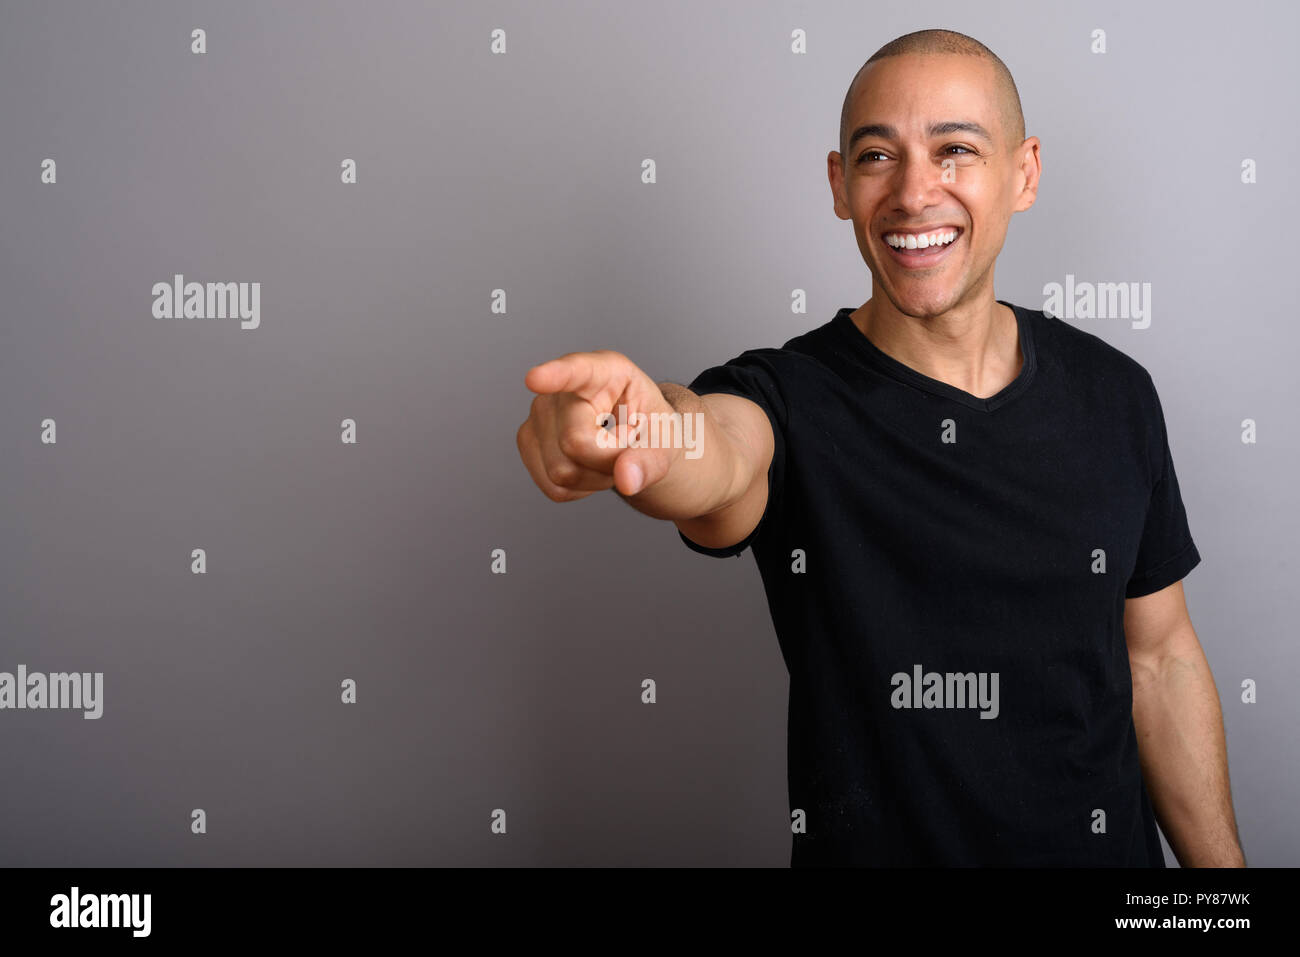 Handsome bald man smiling and pointing finger Stock Photo